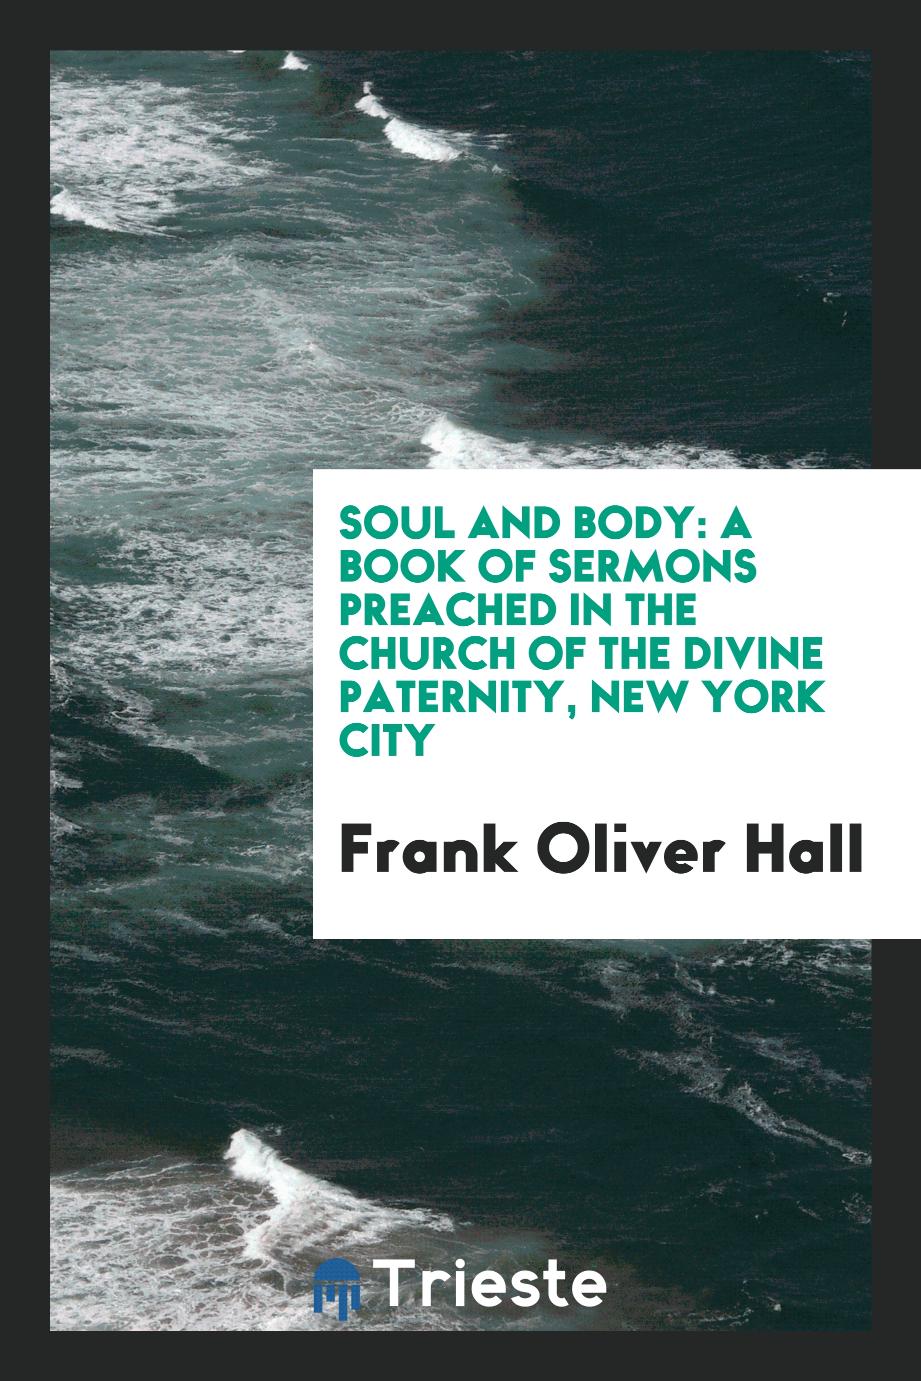 Soul and Body: A Book of Sermons Preached in the Church of the Divine Paternity, New York City